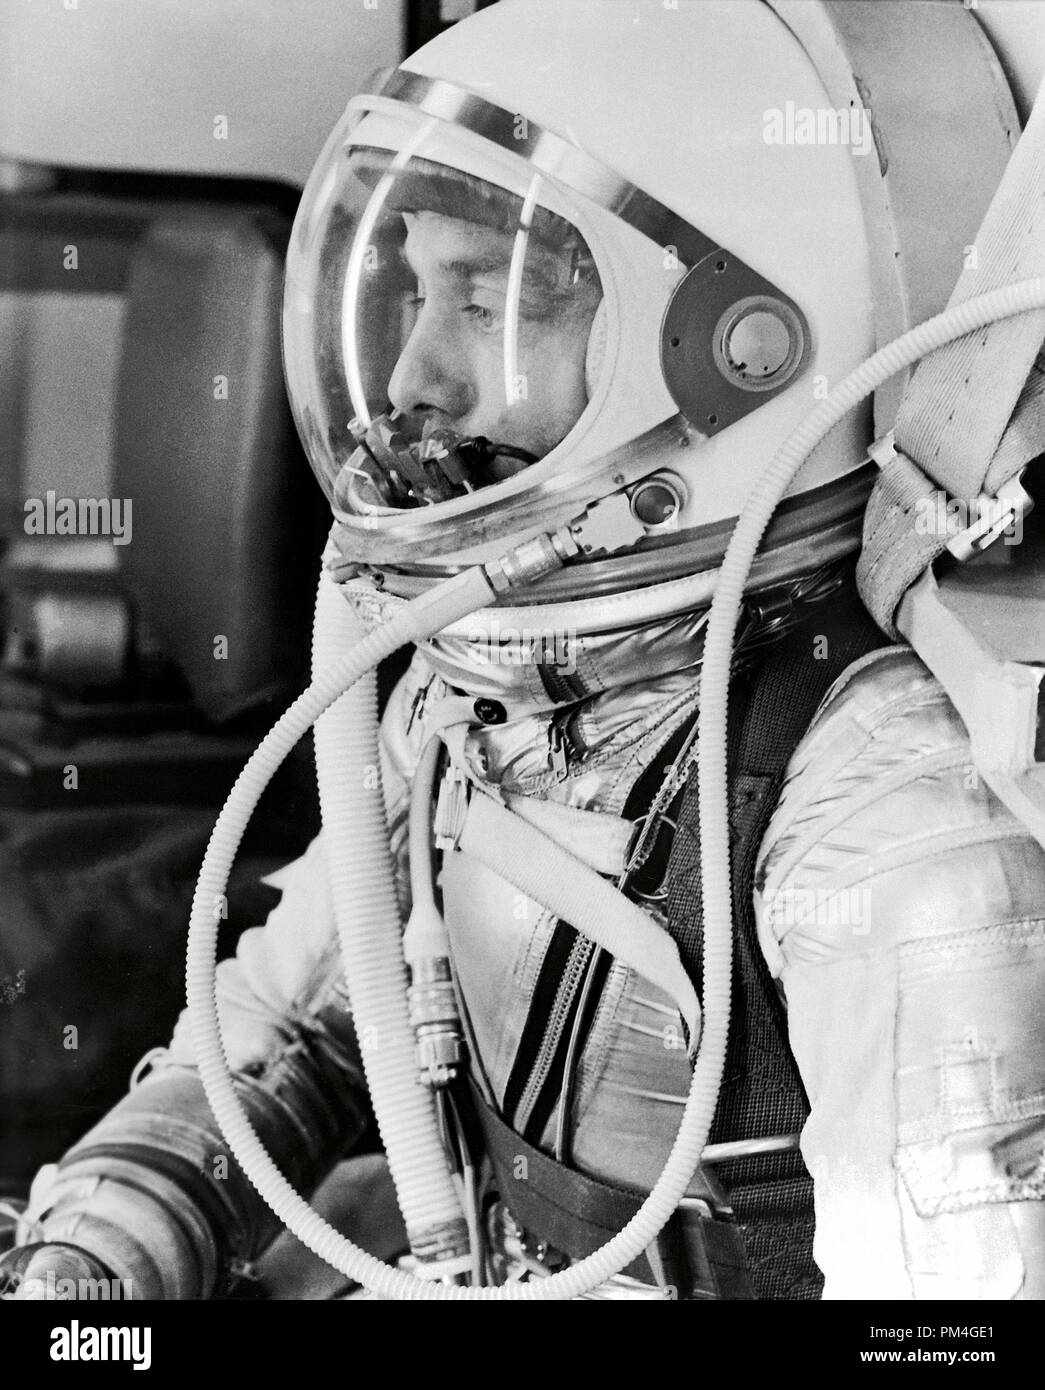 Profile of astronaut Alan Shepard in his silver pressure suit with the helmet visor closed as he prepares for his upcoming Mercury-Redstone 3 (MR-3) launch. On May 5th 1961, Alan B. Shepard Jr. became the first American to fly into space. His Freedom 7 Mercury capsule flew a suborbital trajectory lasting 15 minutes 22 seconds. His spacecraft splashed down in the Atlantic Ocean where he and Freedom 7 were recovered by helicopter and transported to the awaiting aircraft carrier U.S.S. Lake Champlain.    File Reference # 1001 008THA Stock Photo